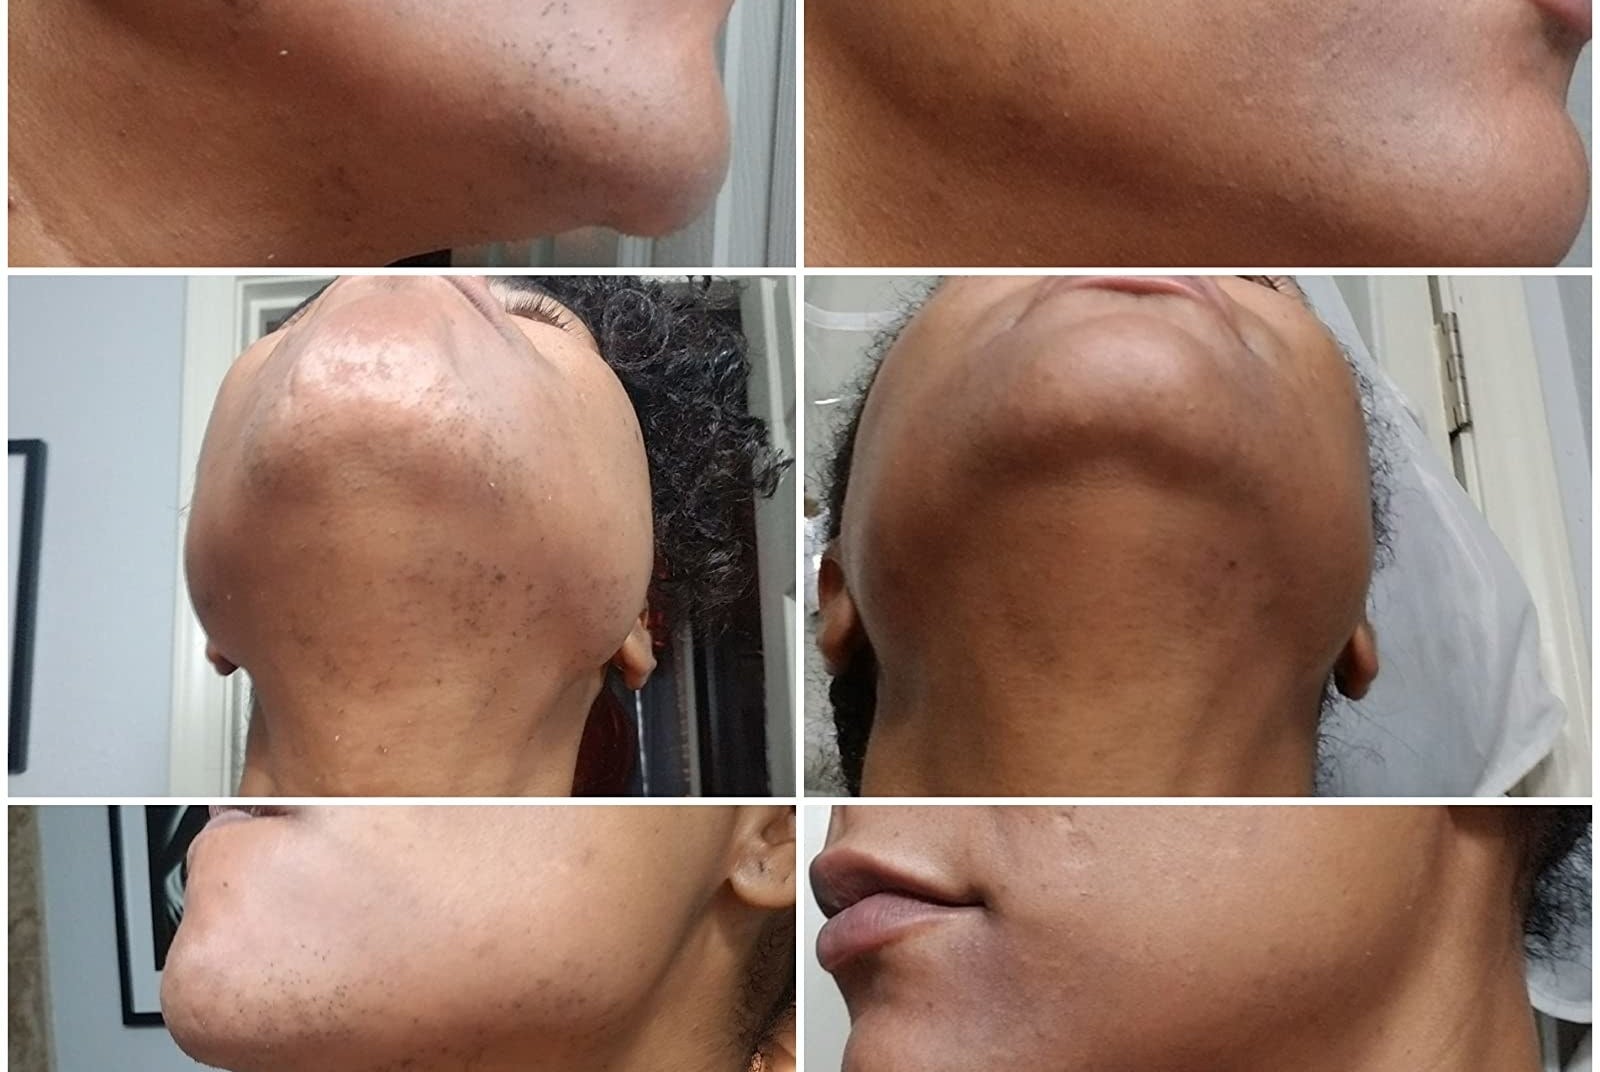 Reviewer showing before-and-after results of using Mederna Scar Cream